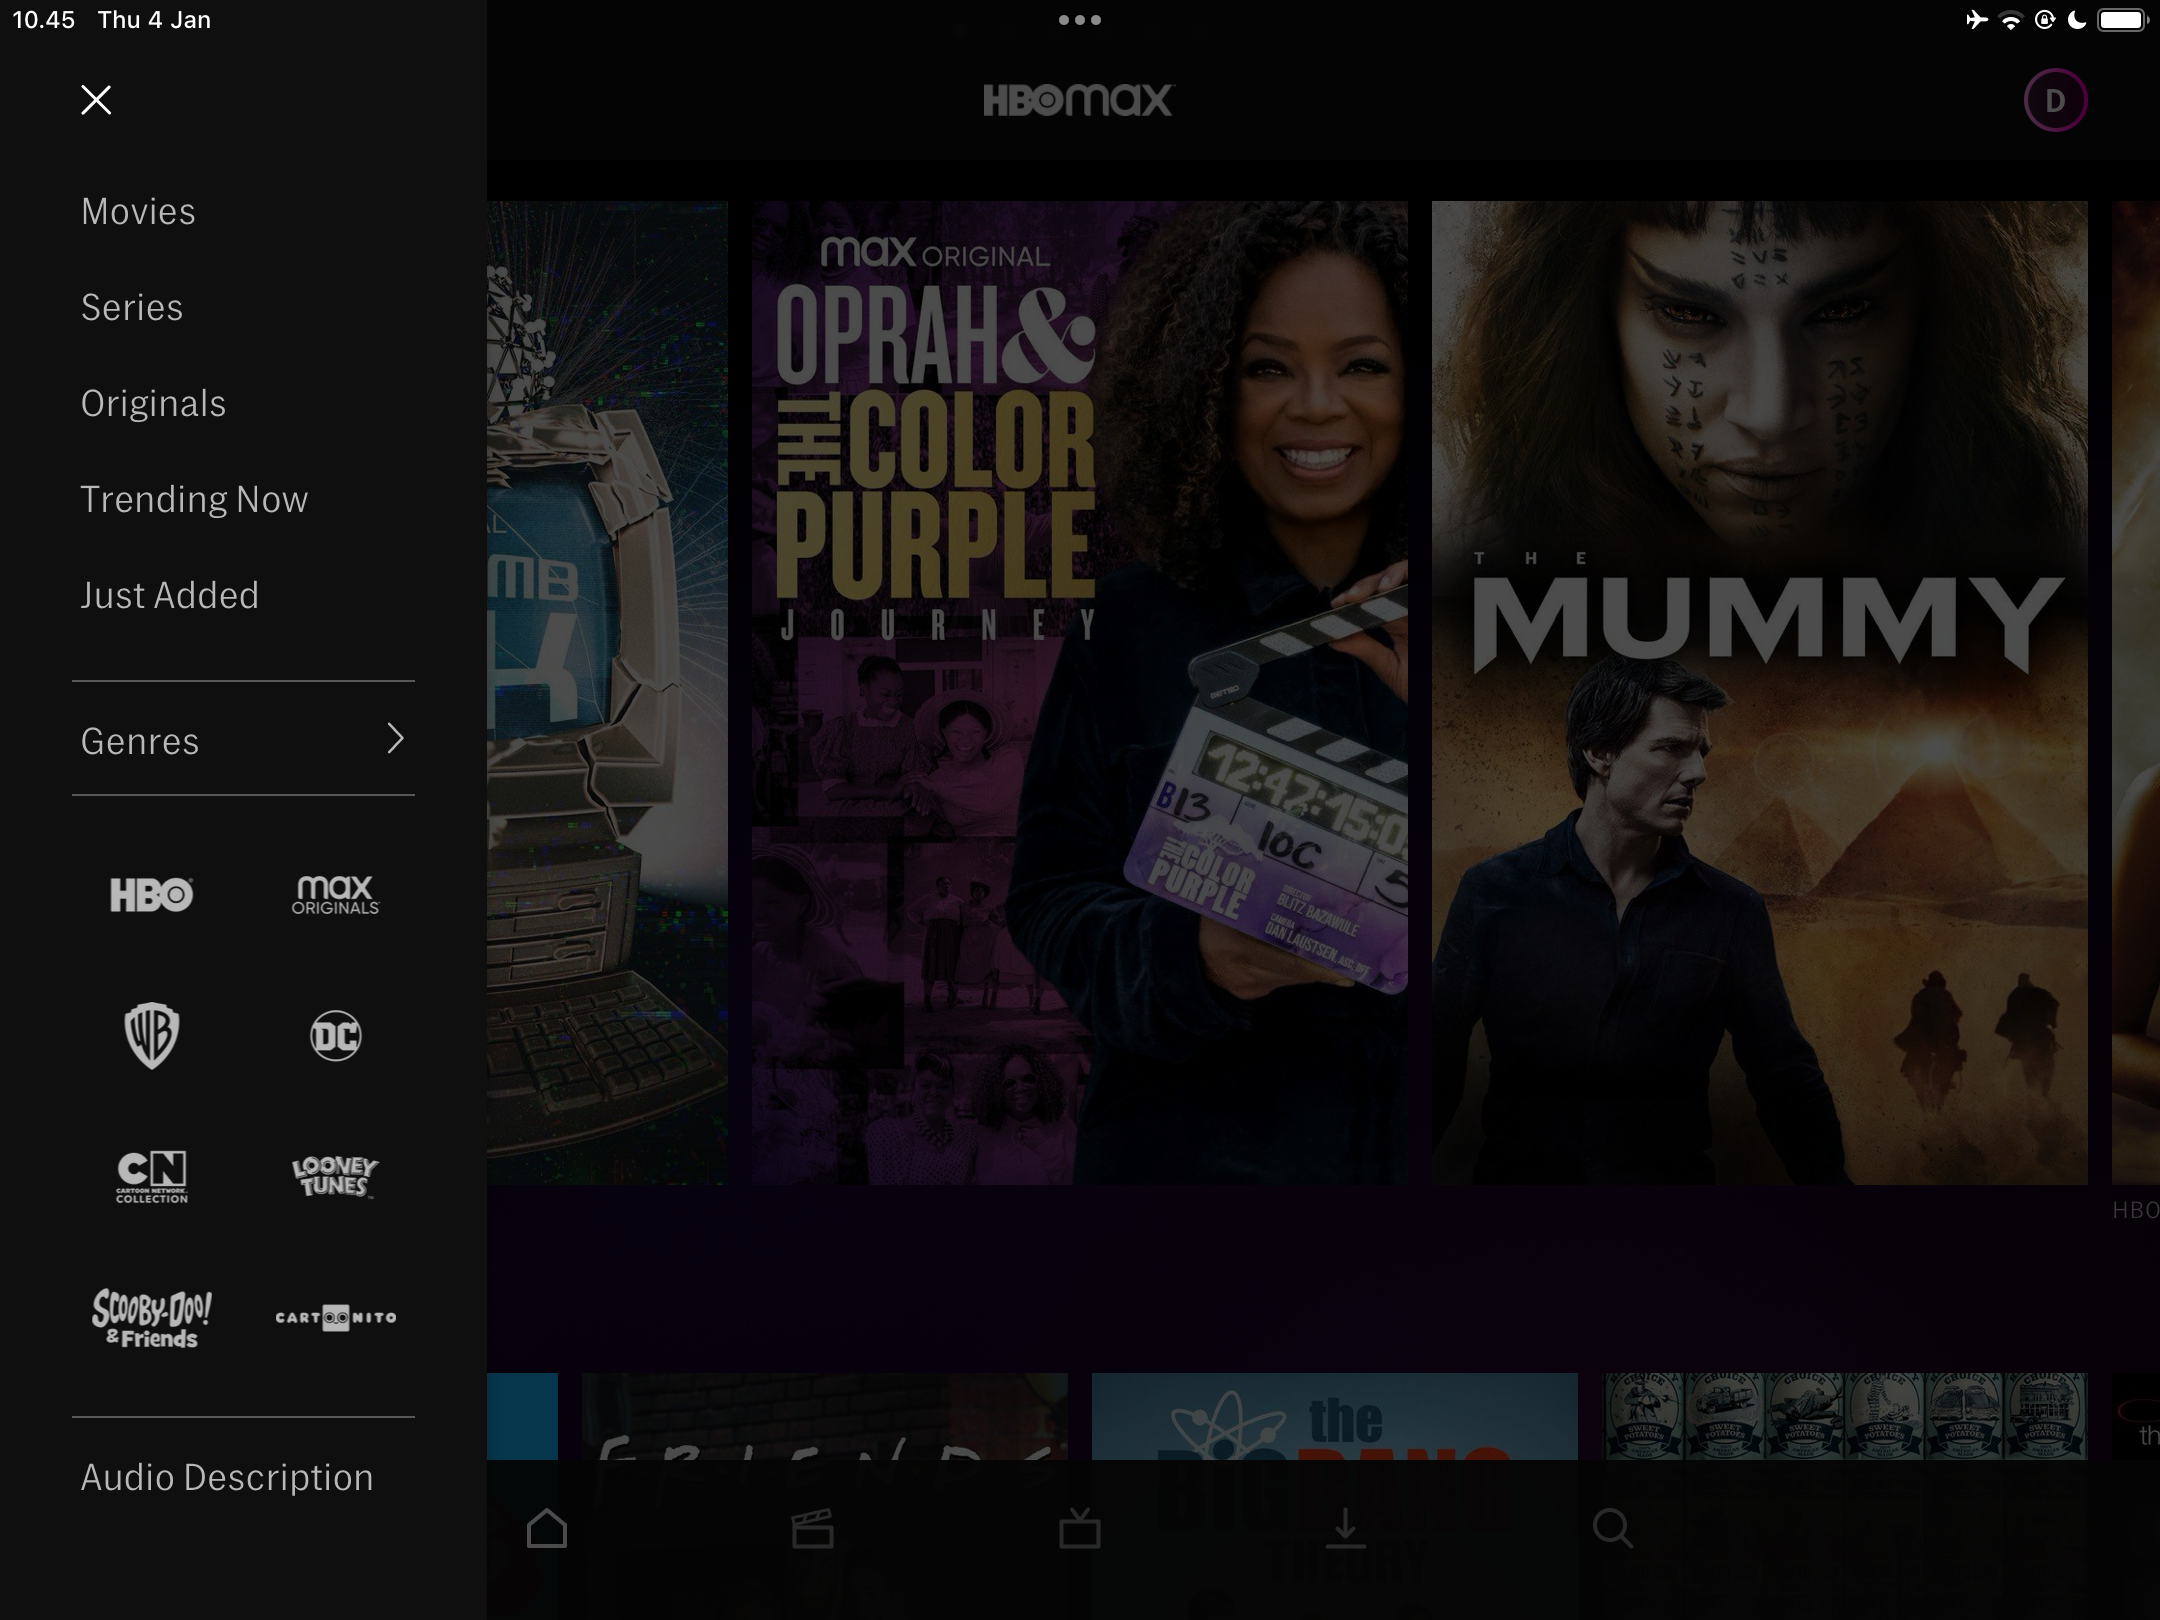 The HBO Max App Interface